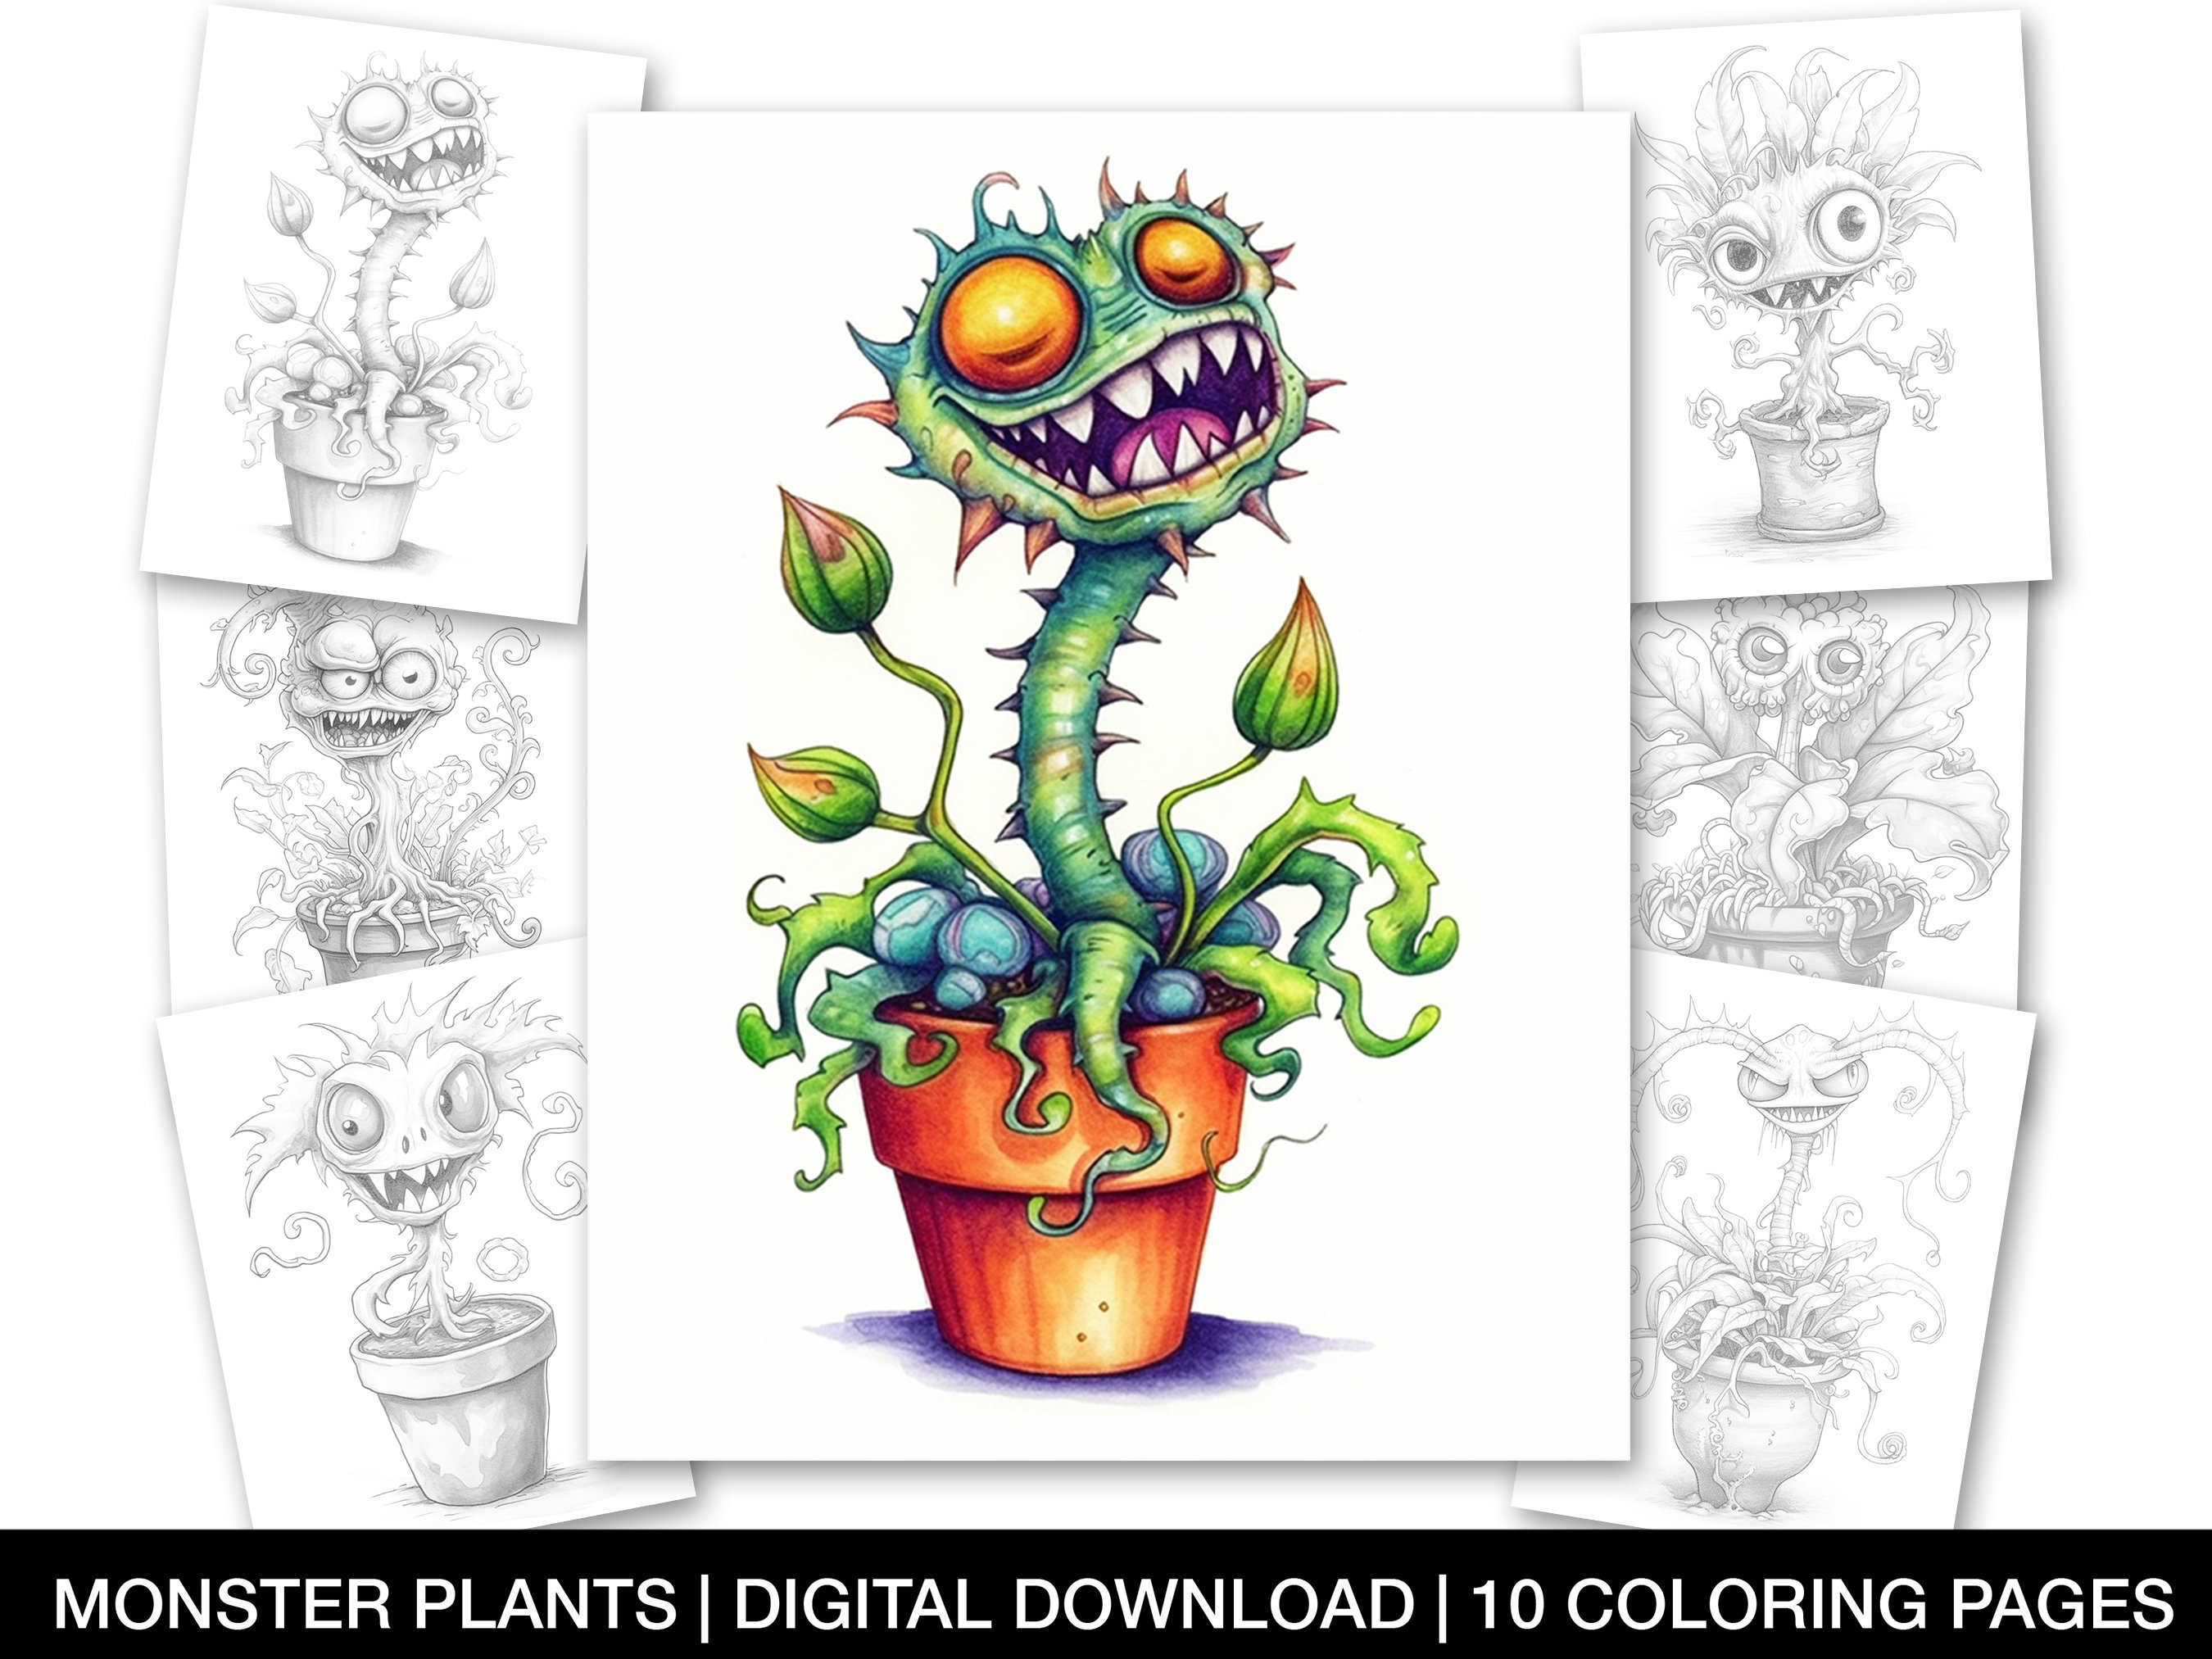 Monster plants digital coloring pages adults and teens colouring book instant download grayscale coloring page printable coloring sheets instant download